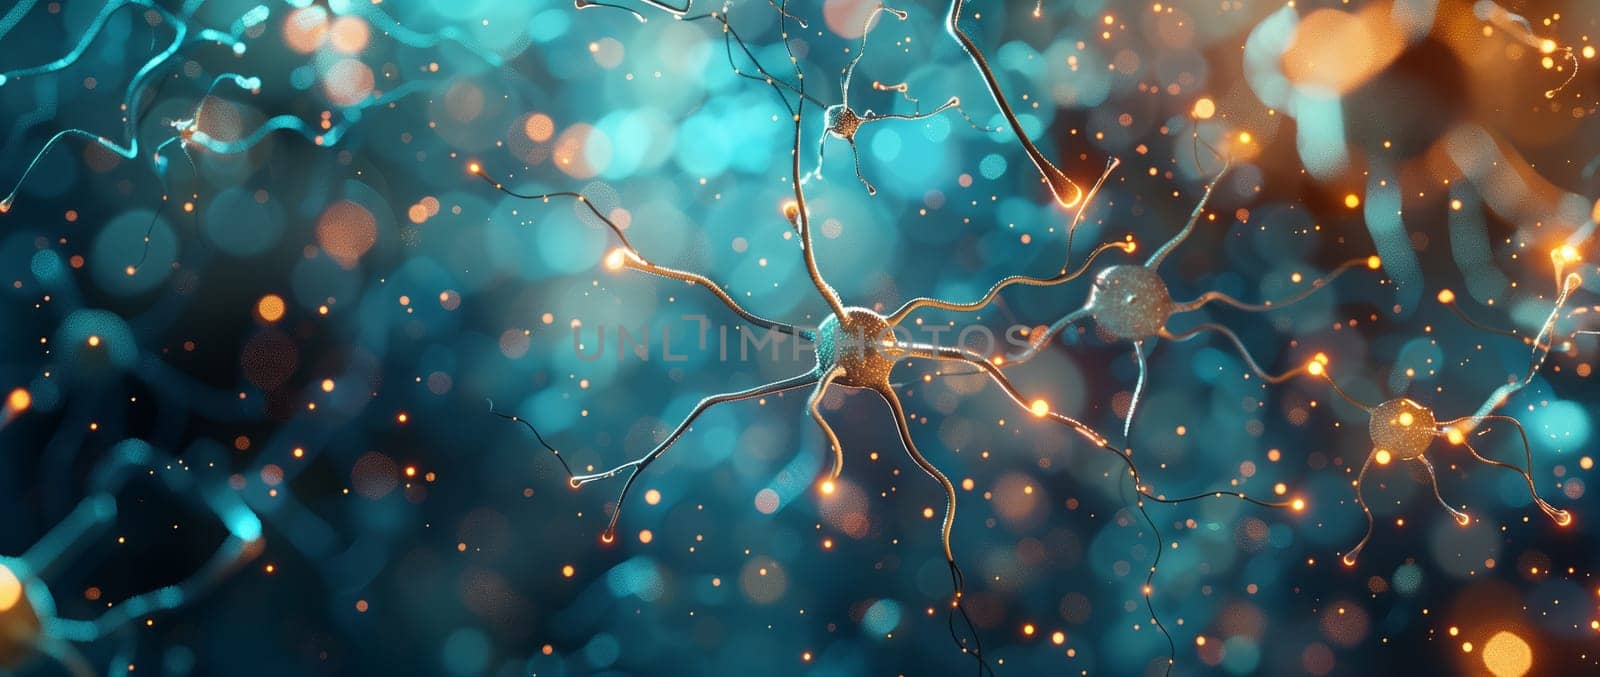 A computergenerated image of a nerve cell in the brain, resembling a fictional character. The intricate pattern and electric blue color make it look like art from underwater macro photography